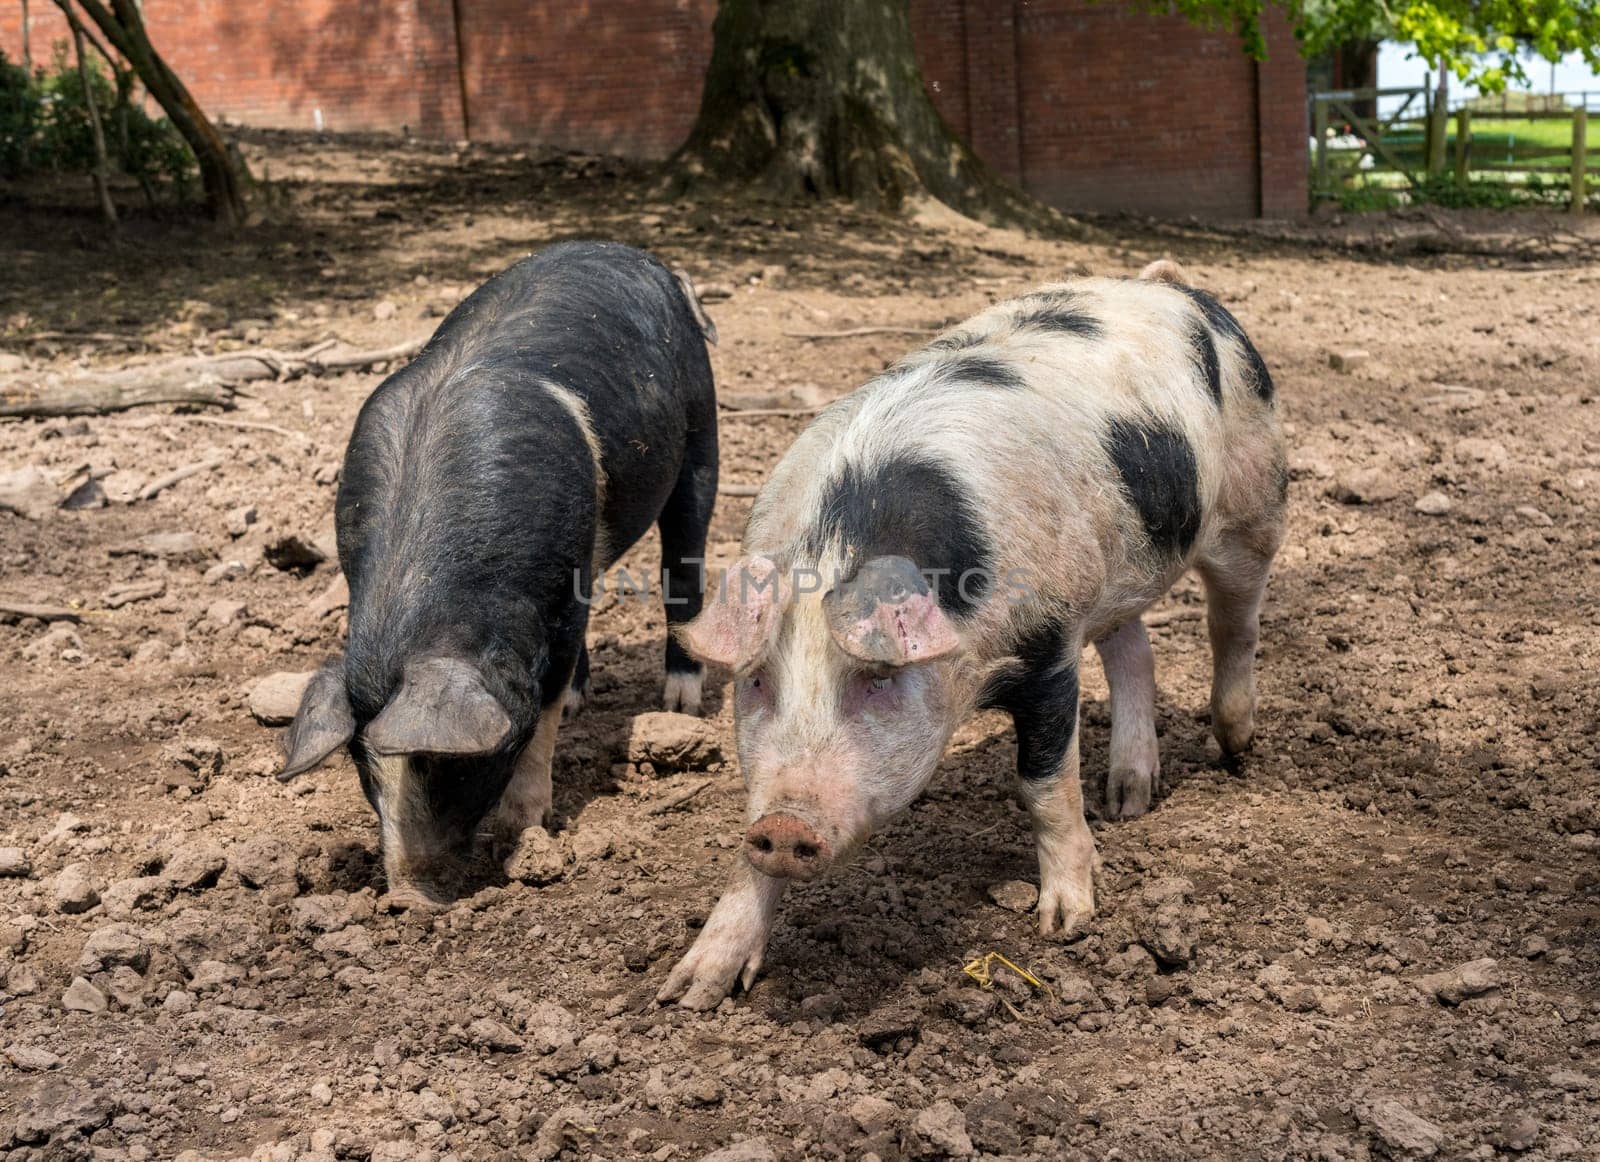 Two saddleback pigs in their pen in the UK by steheap